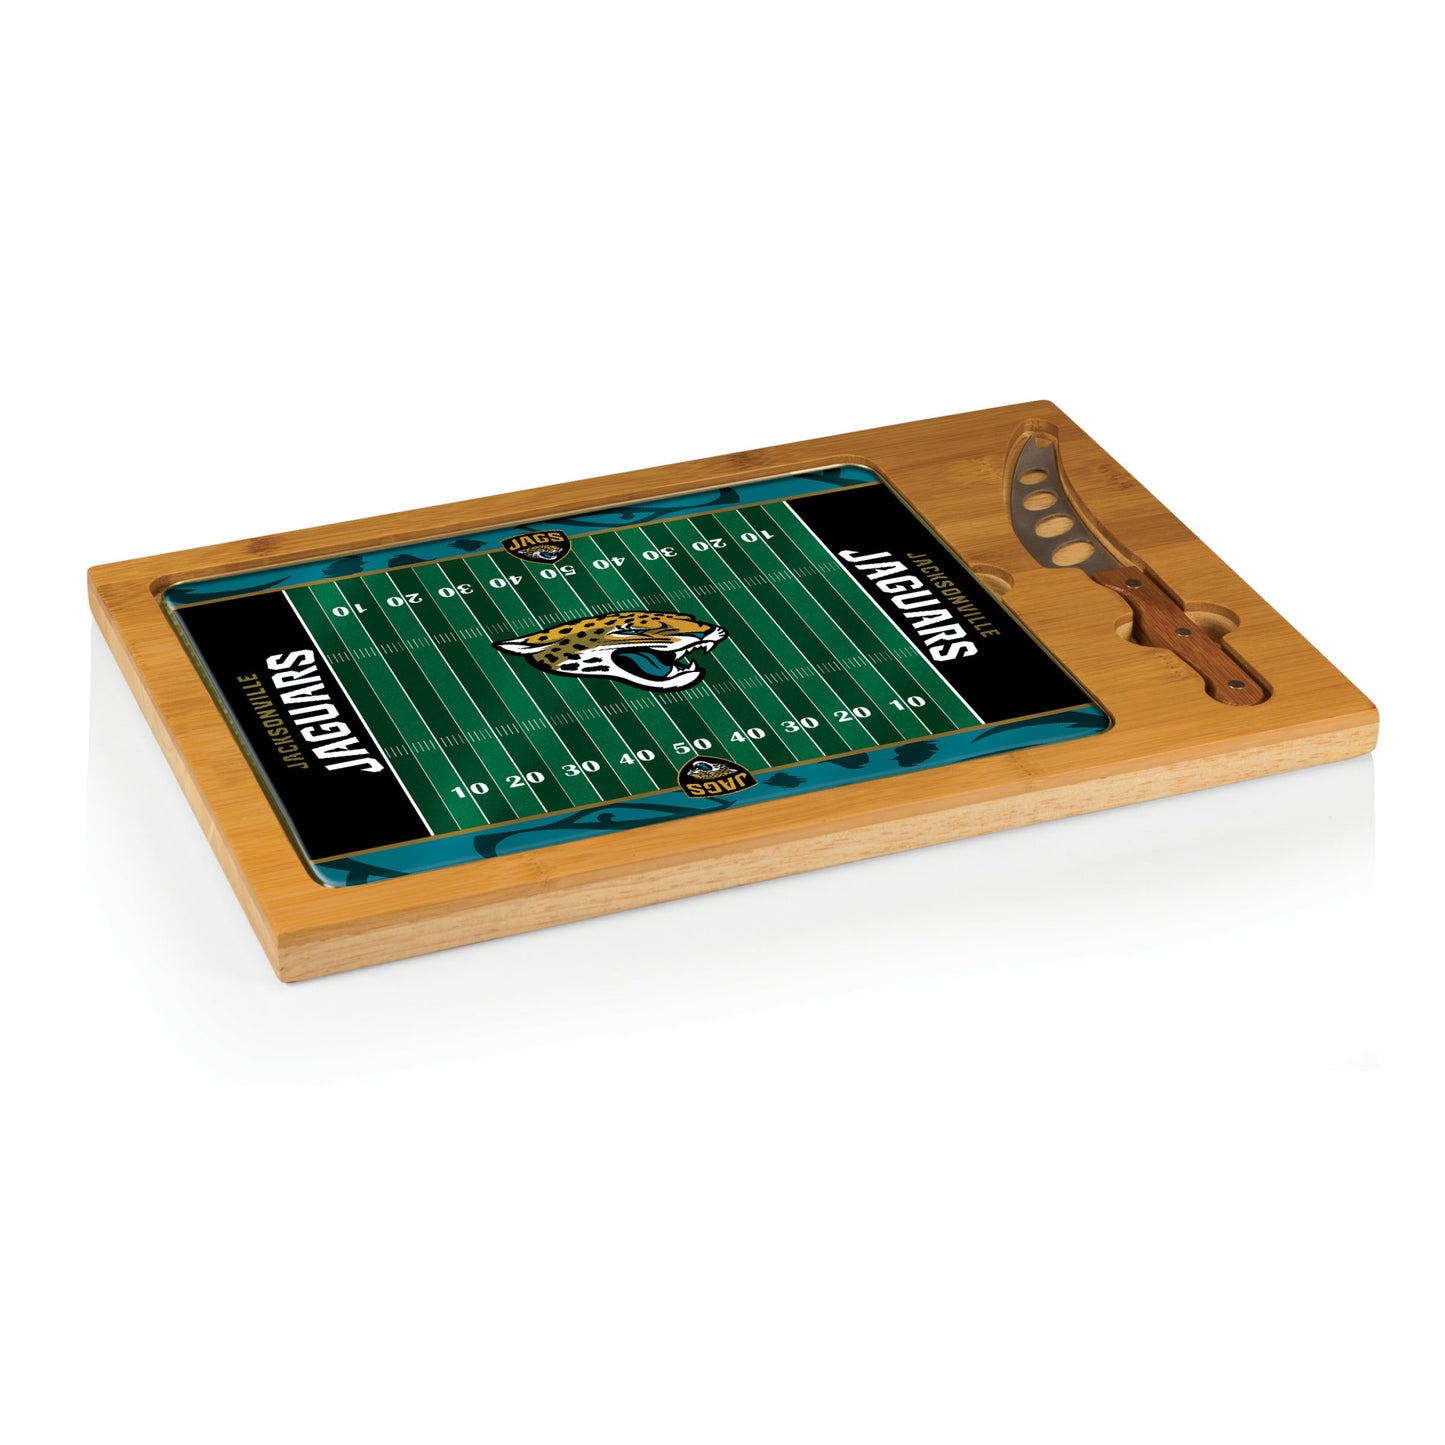 Jacksonville Jaguars - Icon Glass Top Cutting Board & Knife Set by Picnic Time